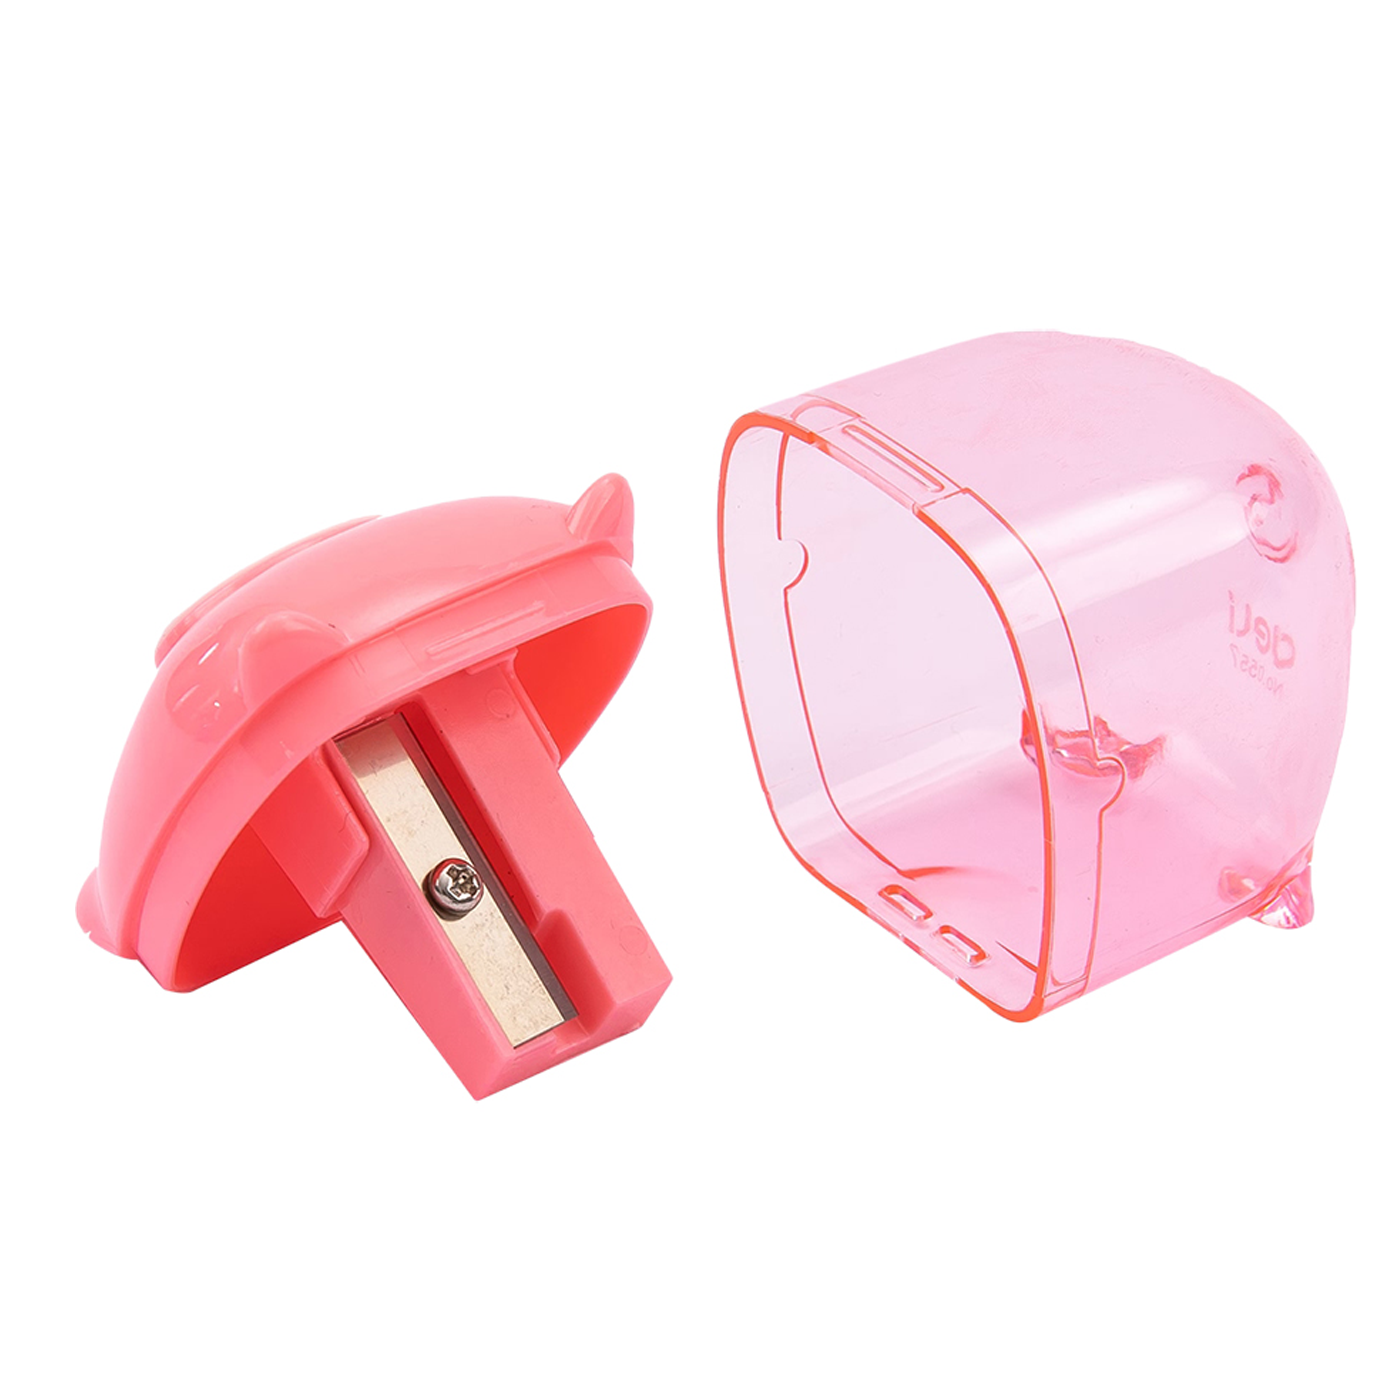 Deli Pencil Sharpener Single Hole with Container Piggy Pink